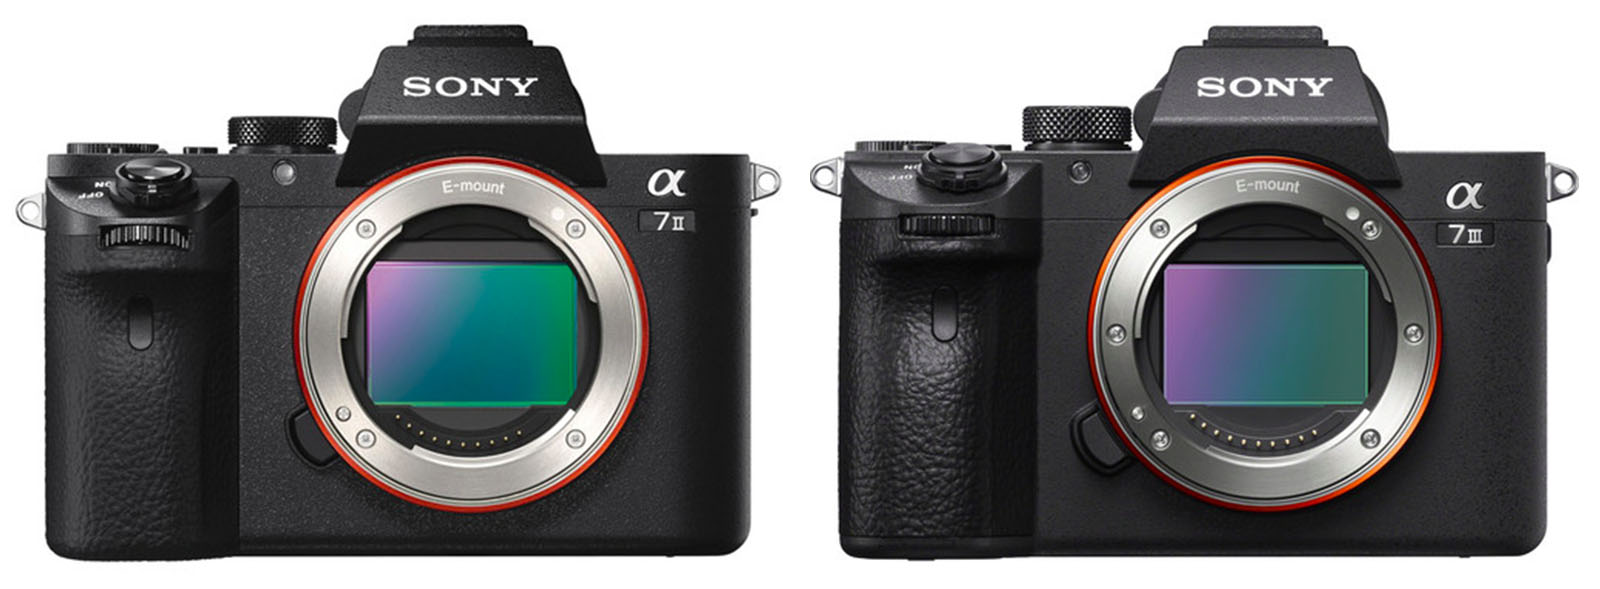 sony a7ii vs a7iii front view